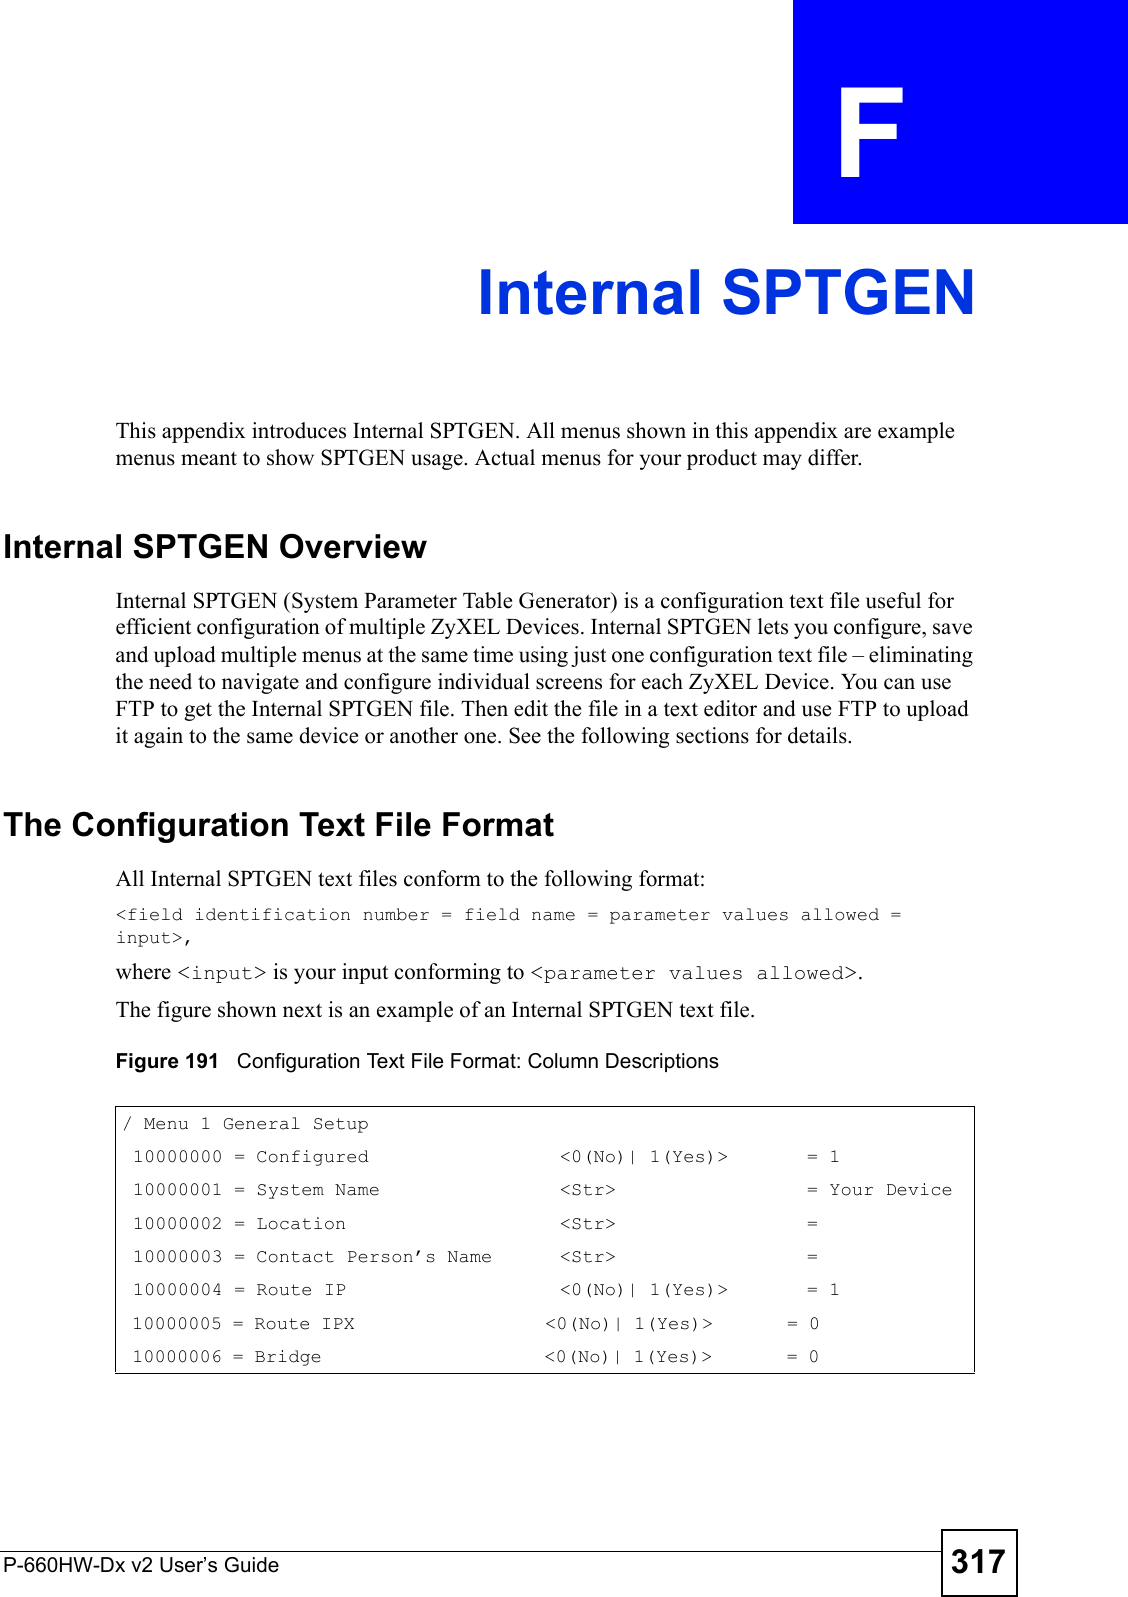 P-660HW-Dx v2 User’s Guide 317APPENDIX  F Internal SPTGENThis appendix introduces Internal SPTGEN. All menus shown in this appendix are example menus meant to show SPTGEN usage. Actual menus for your product may differ.Internal SPTGEN OverviewInternal SPTGEN (System Parameter Table Generator) is a configuration text file useful for efficient configuration of multiple ZyXEL Devices. Internal SPTGEN lets you configure, save and upload multiple menus at the same time using just one configuration text file – eliminating the need to navigate and configure individual screens for each ZyXEL Device. You can use FTP to get the Internal SPTGEN file. Then edit the file in a text editor and use FTP to upload it again to the same device or another one. See the following sections for details. The Configuration Text File FormatAll Internal SPTGEN text files conform to the following format:&lt;field identification number = field name = parameter values allowed = input&gt;,where &lt;input&gt; is your input conforming to &lt;parameter values allowed&gt;. The figure shown next is an example of an Internal SPTGEN text file.Figure 191   Configuration Text File Format: Column Descriptions/ Menu 1 General Setup     10000000 = Configured                 &lt;0(No)| 1(Yes)&gt;       = 1     10000001 = System Name                &lt;Str&gt;                 = Your Device 10000002 = Location                   &lt;Str&gt;                 =      10000003 = Contact Person’s Name      &lt;Str&gt;                 =      10000004 = Route IP                   &lt;0(No)| 1(Yes)&gt;       = 1     10000005 = Route IPX                  &lt;0(No)| 1(Yes)&gt;       = 0               10000006 = Bridge                     &lt;0(No)| 1(Yes)&gt;       = 0              